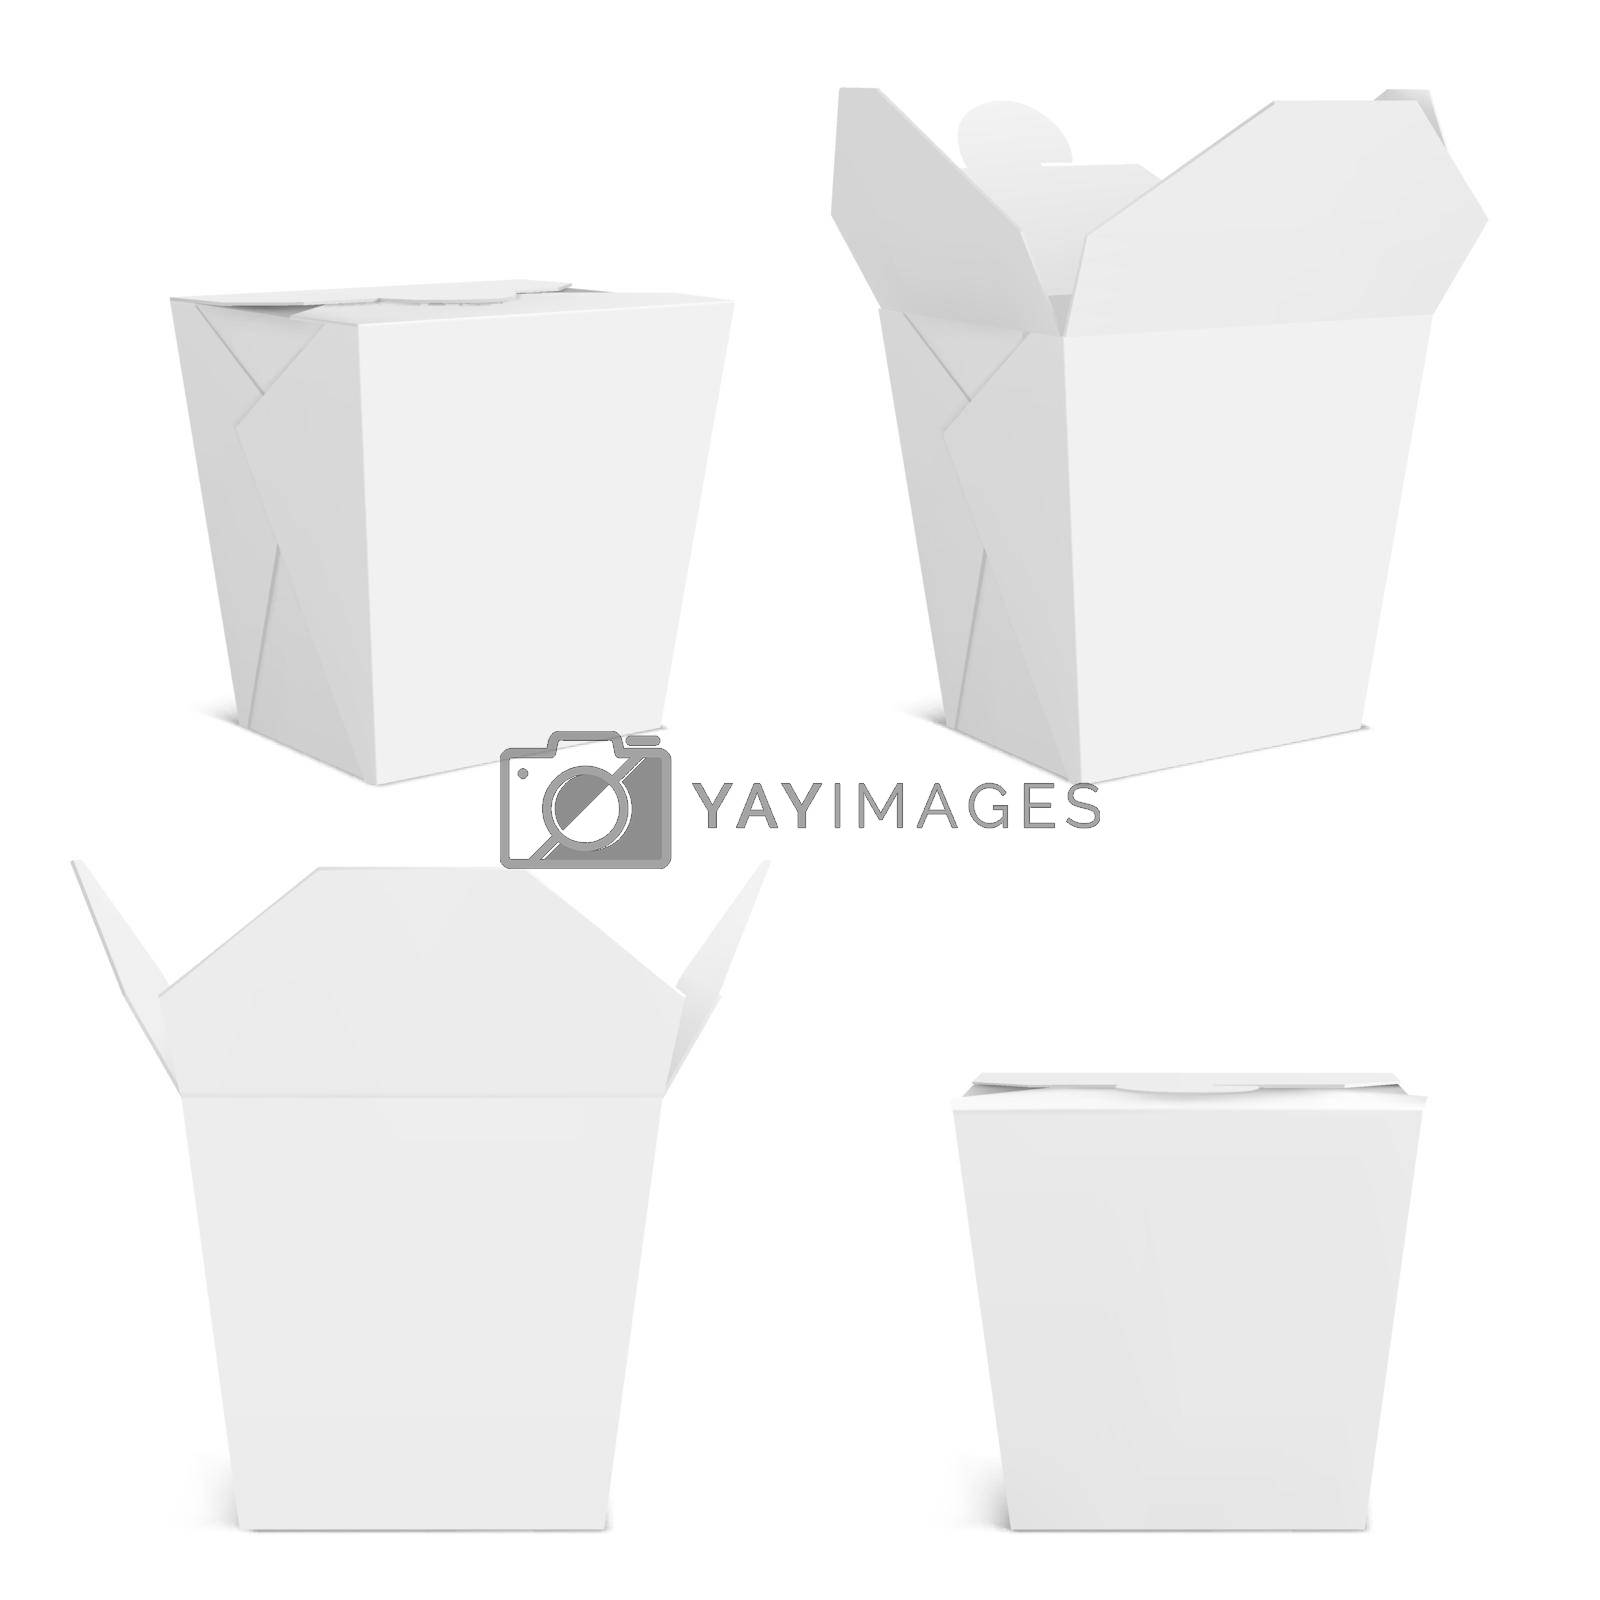 Royalty free image of Wok box mockup, blank take away food container by vectorart